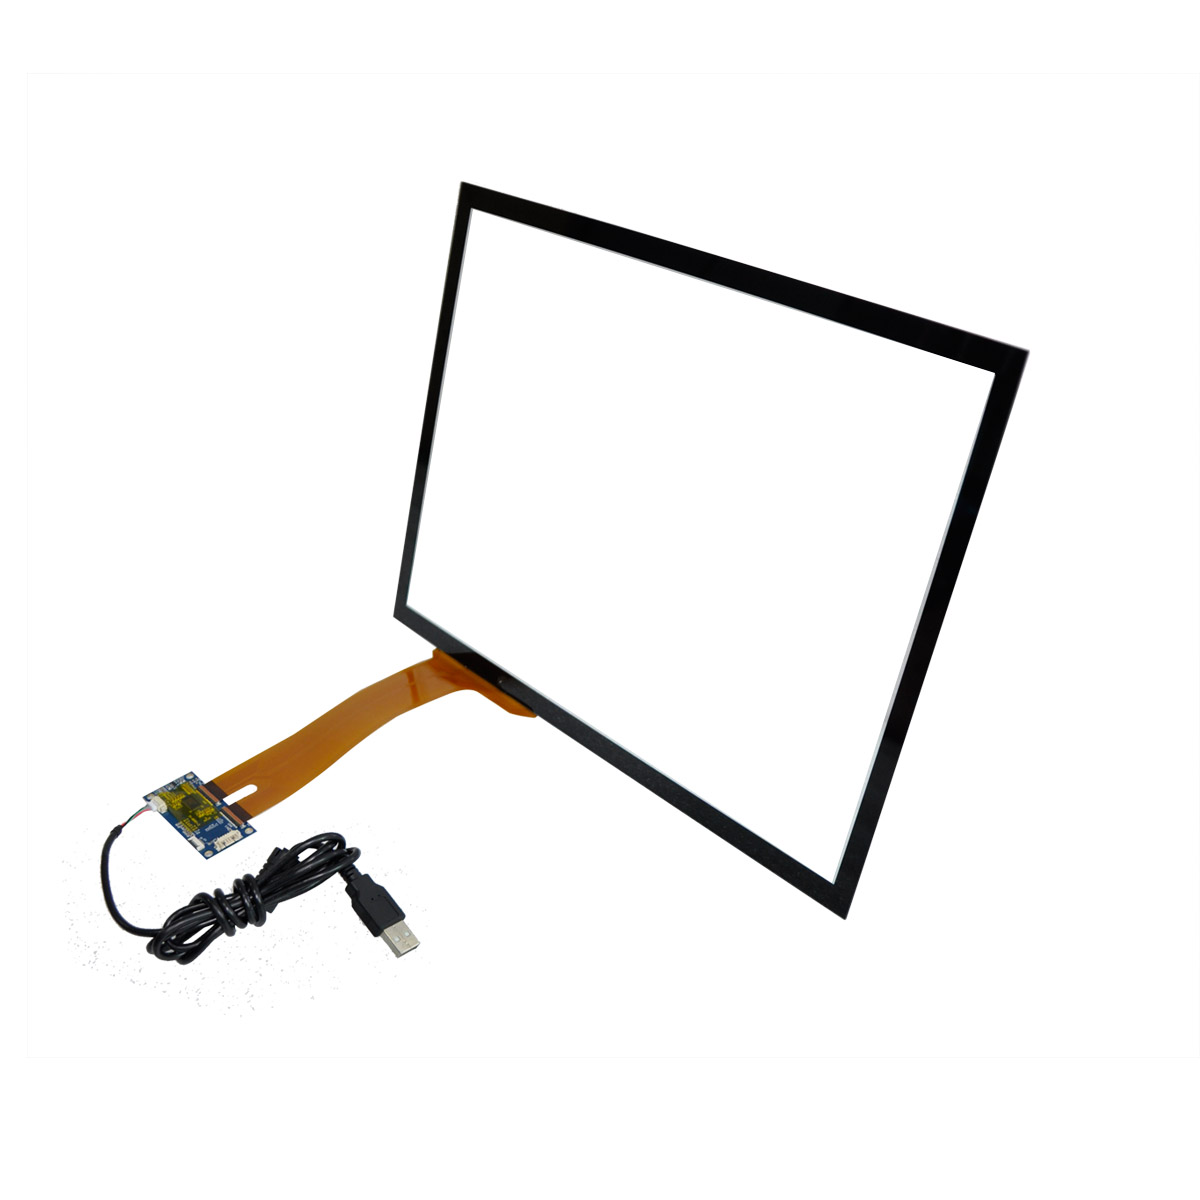 https://www.cjtouch.com/odm-oem-65-inch-high-sensitive-capacitive-touch-screen-touch-sensor-foil-for-touch-film-digital-product/